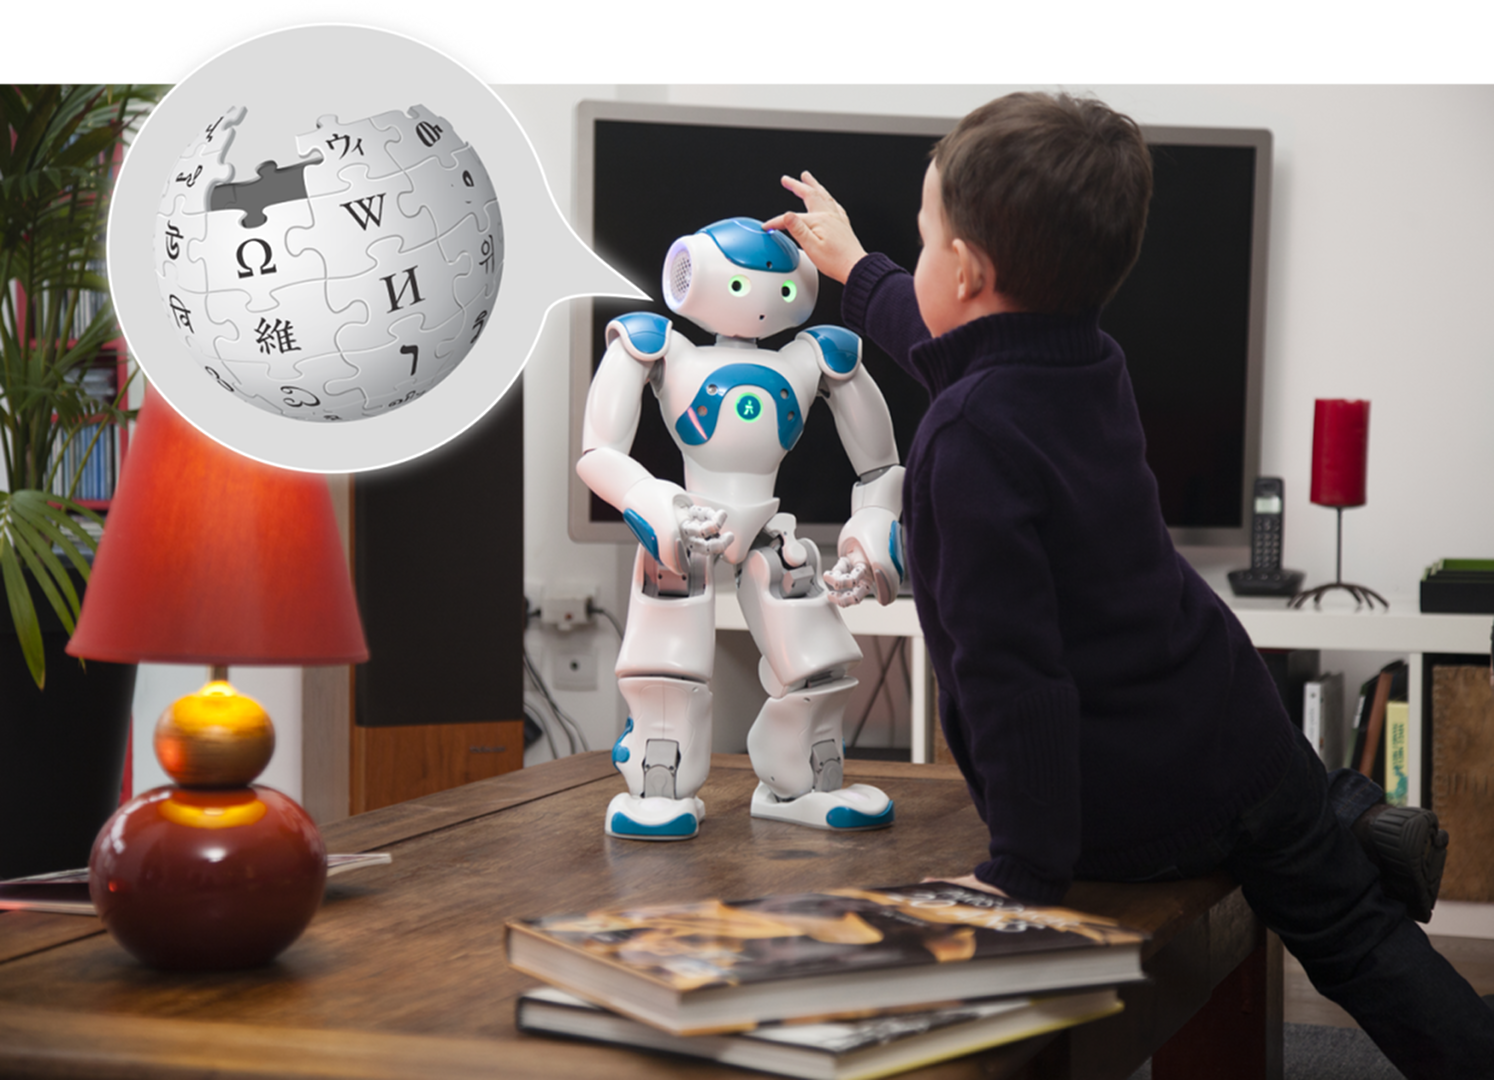 A child using WikiTalk with a robot